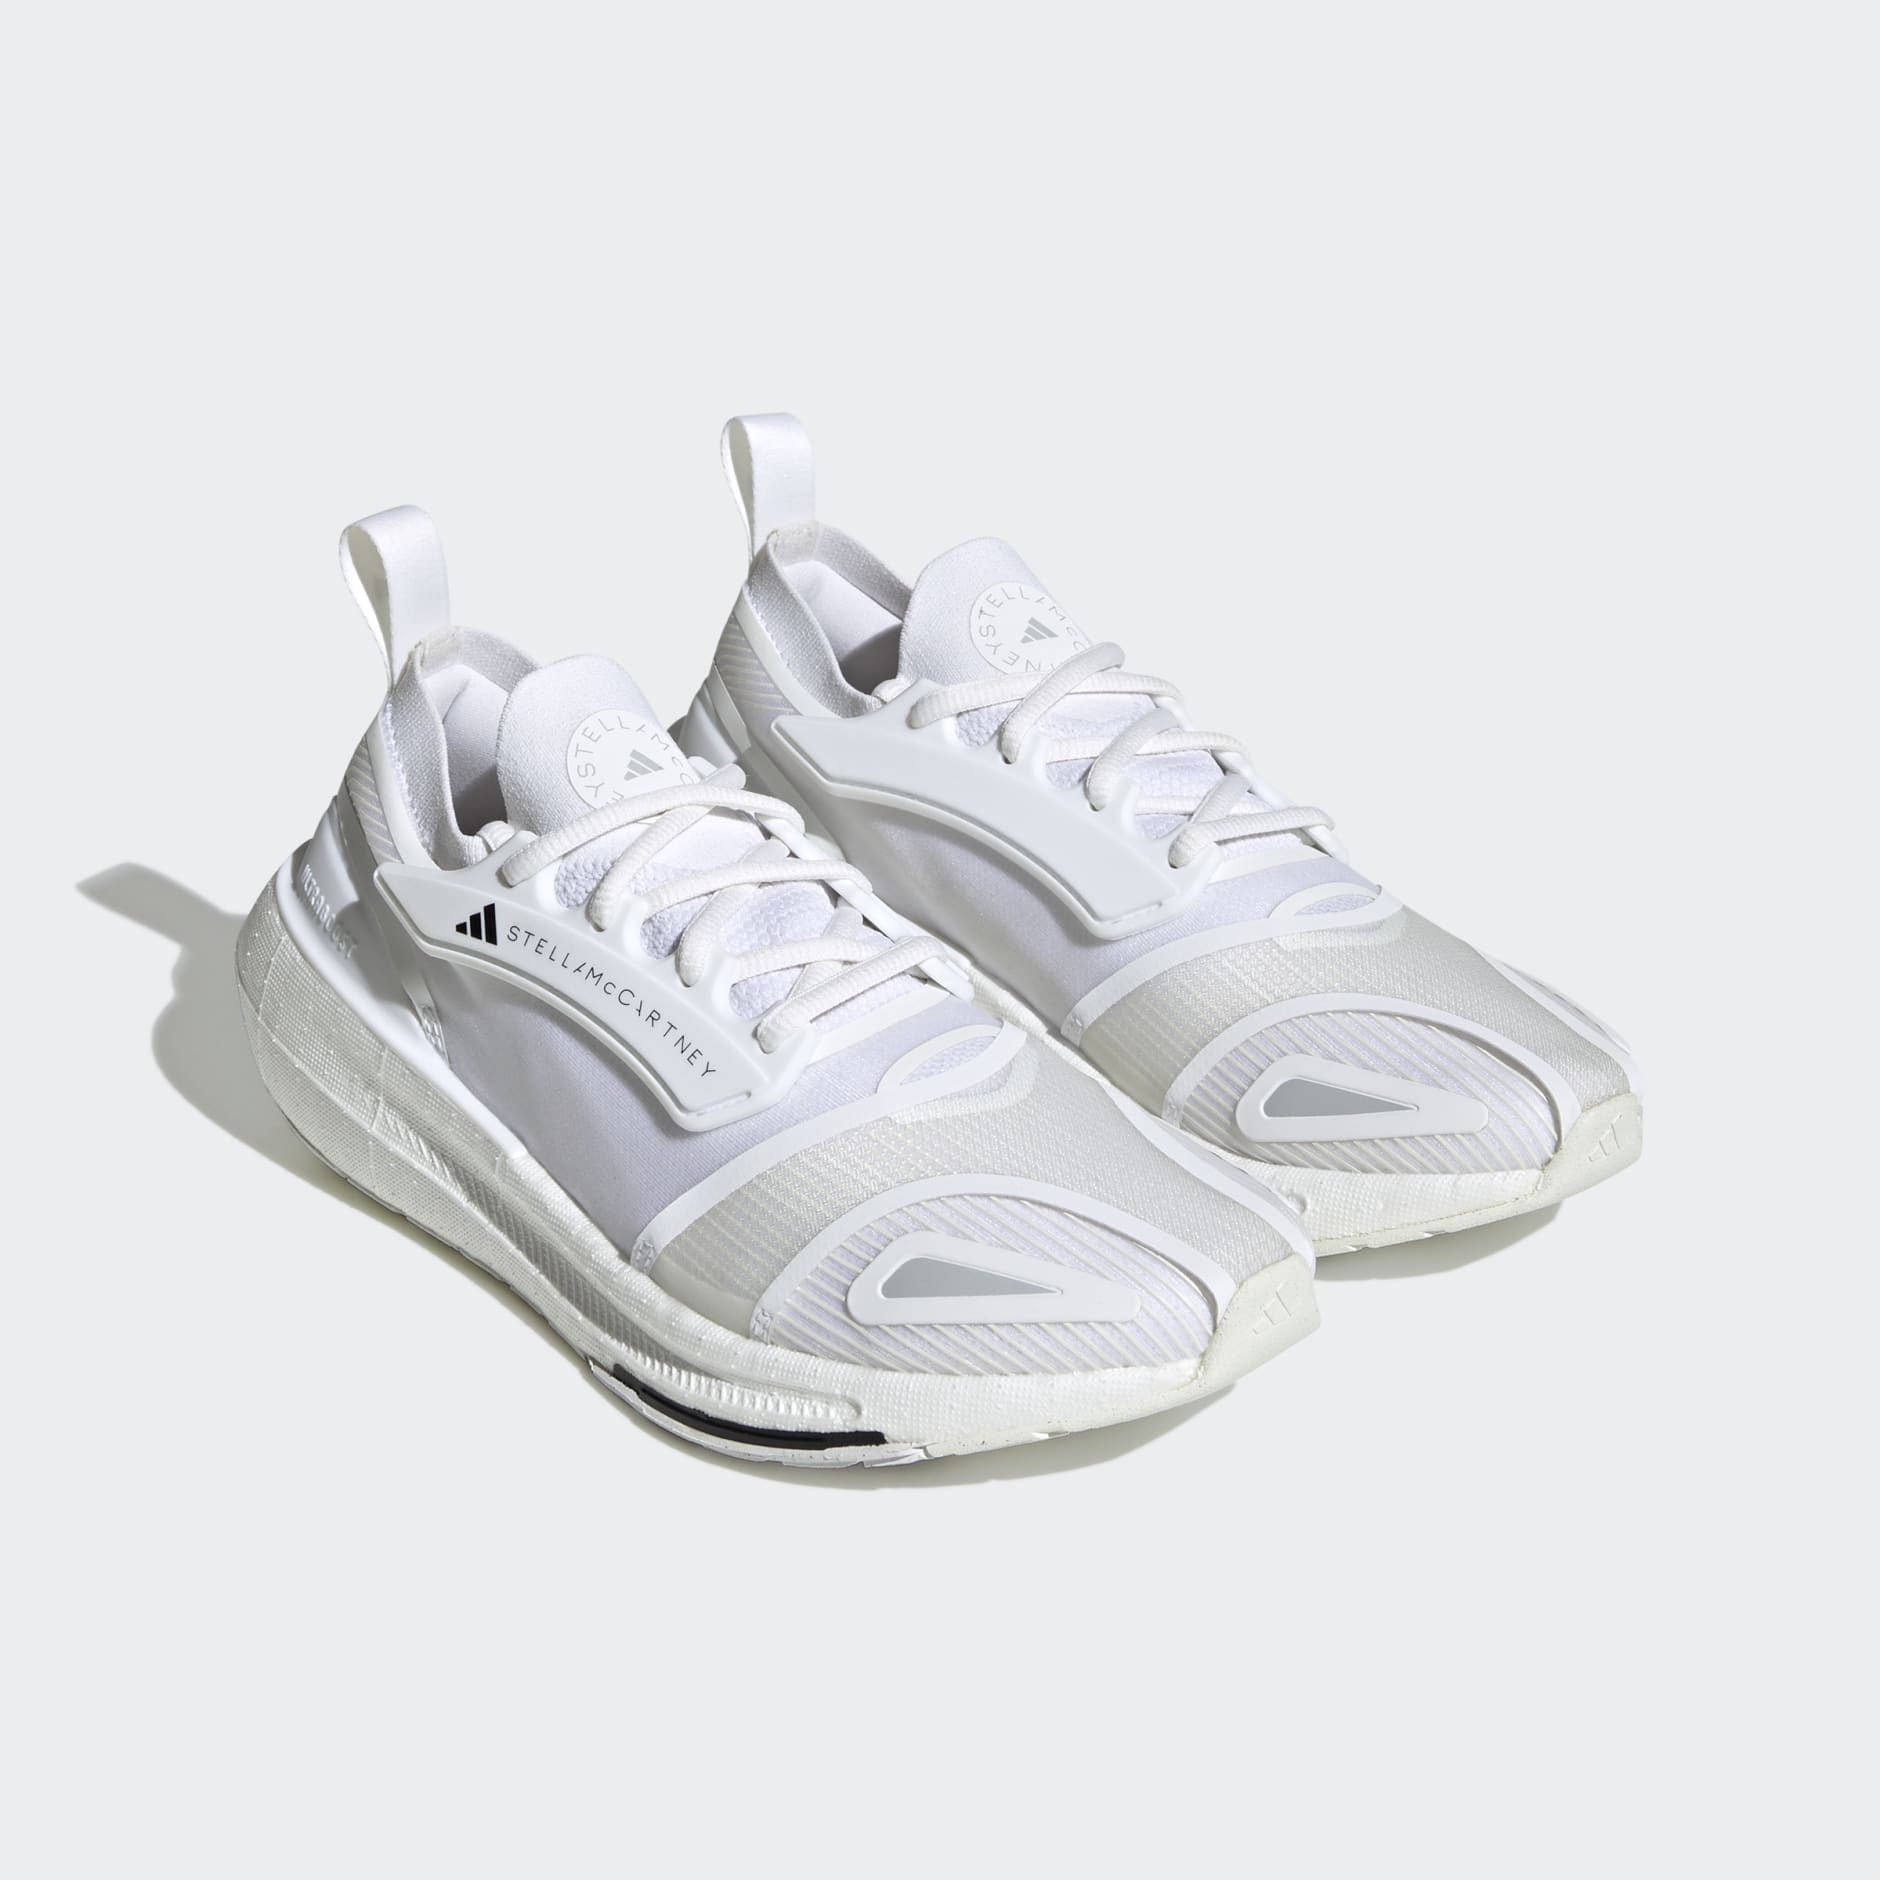 Shoes - adidas by Stella McCartney Ultraboost Light Shoes - White ...